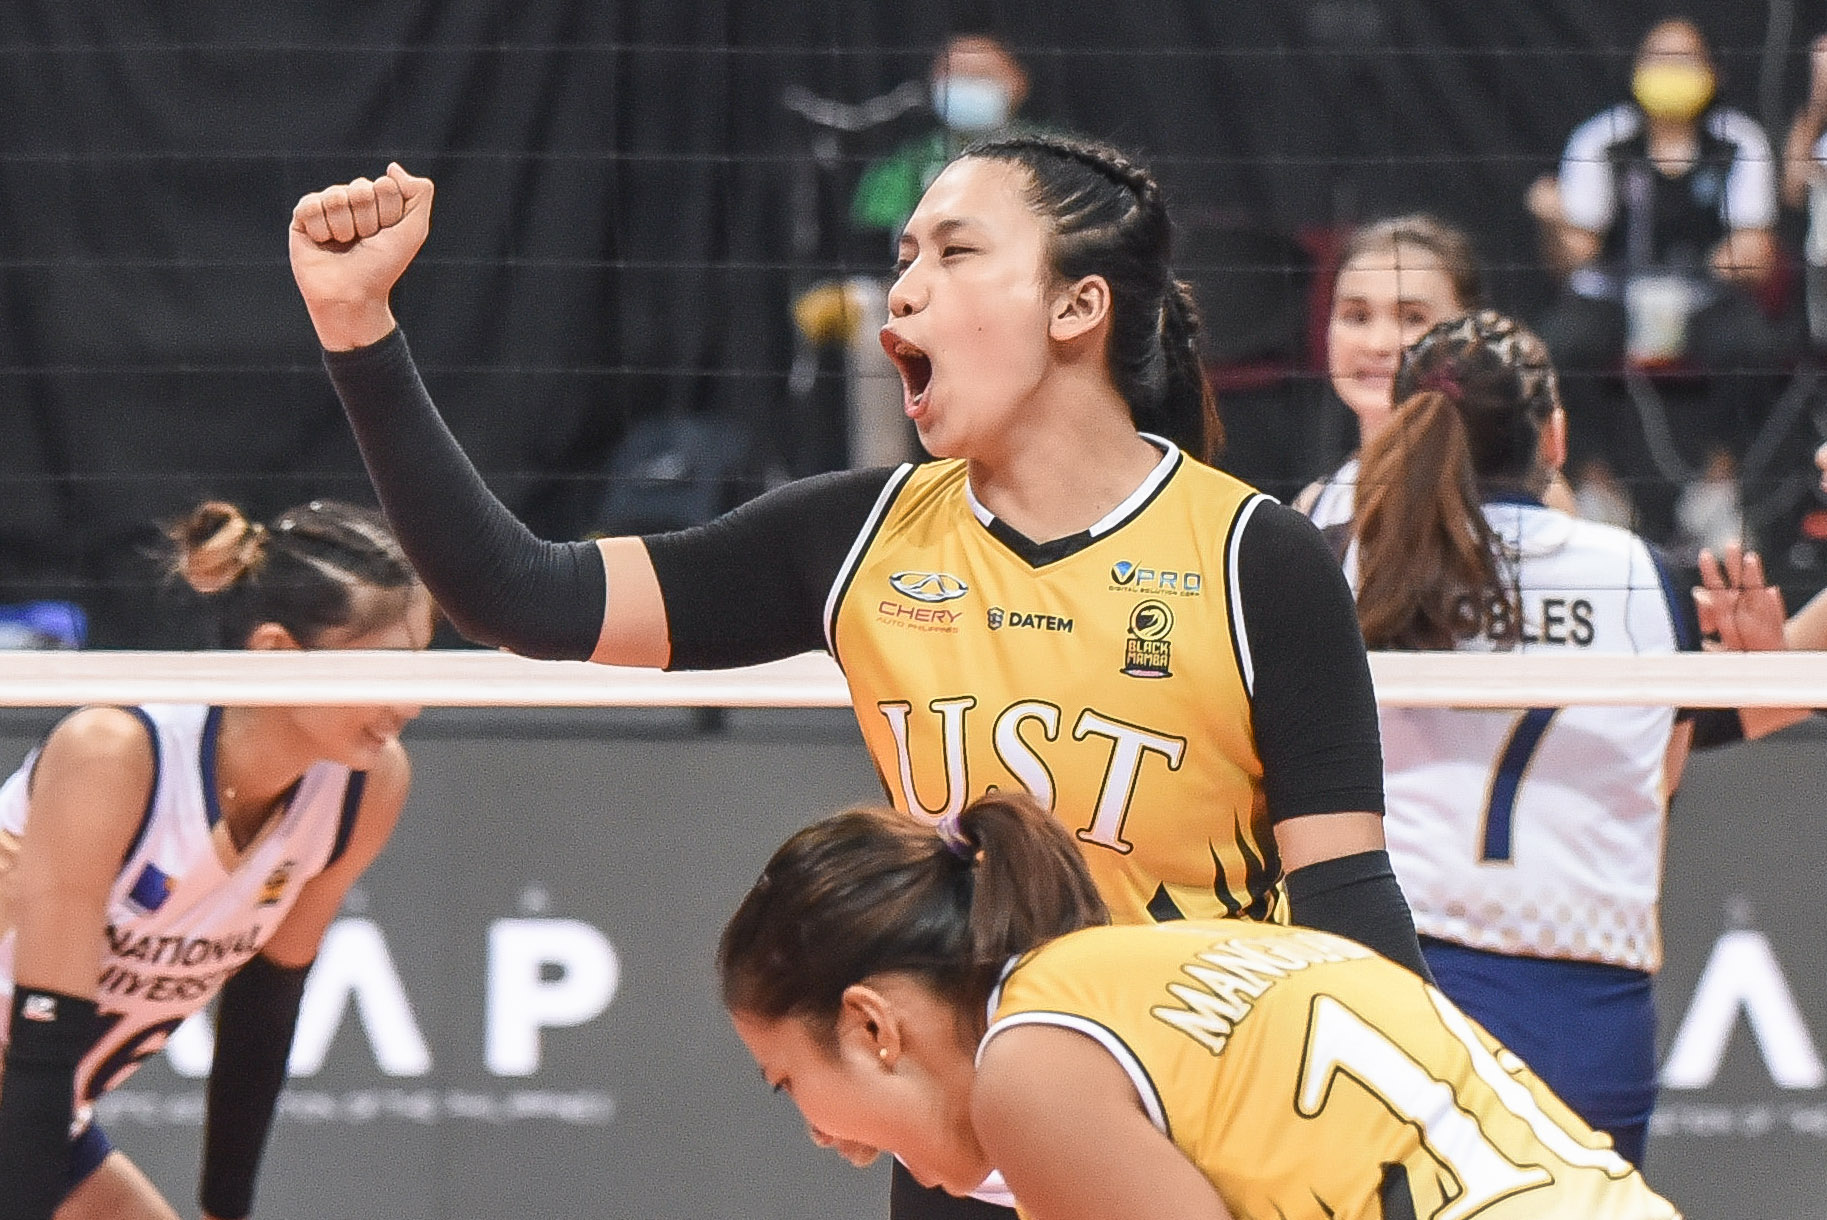 Camille Victoria signs with Akari Chargers for her PVL debut